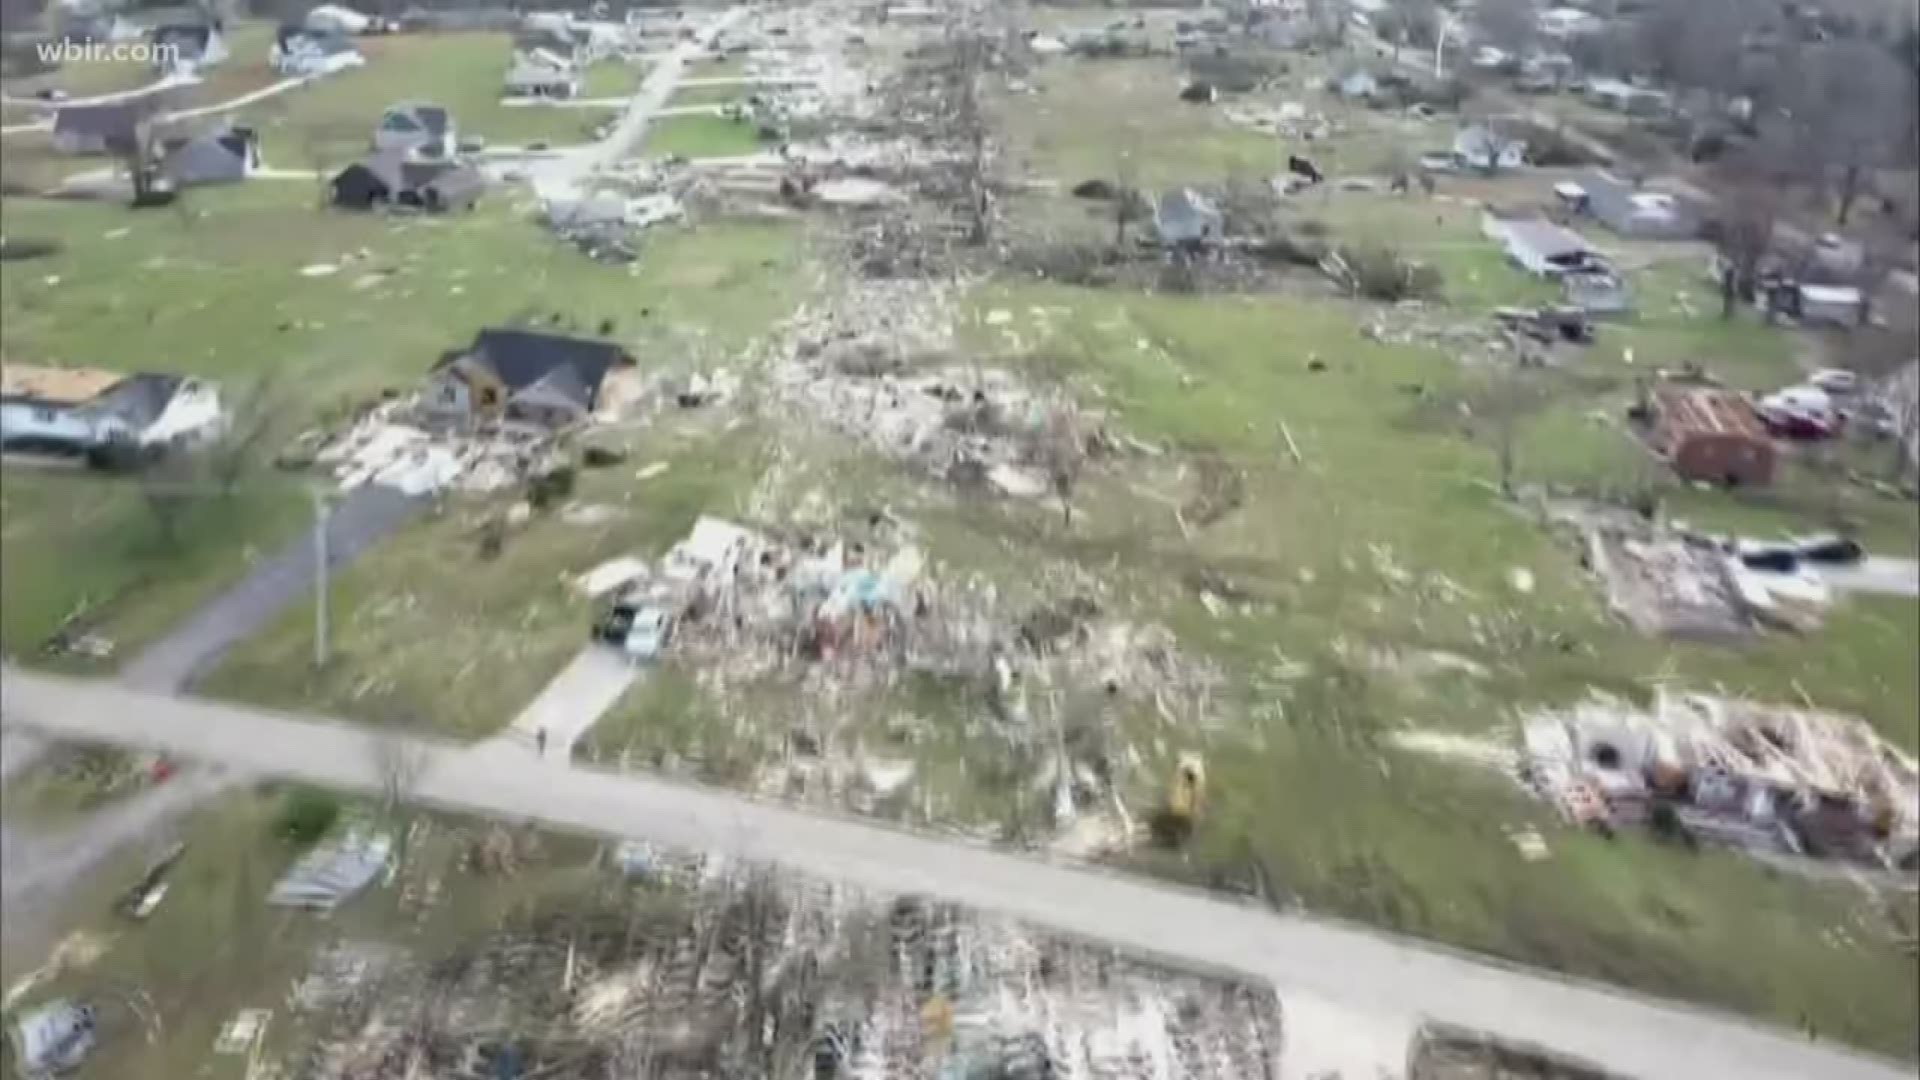 Governor Bill Lee announced the FEMA has approved a disaster declaration for counties impacted by the tornadoes earlier this month.